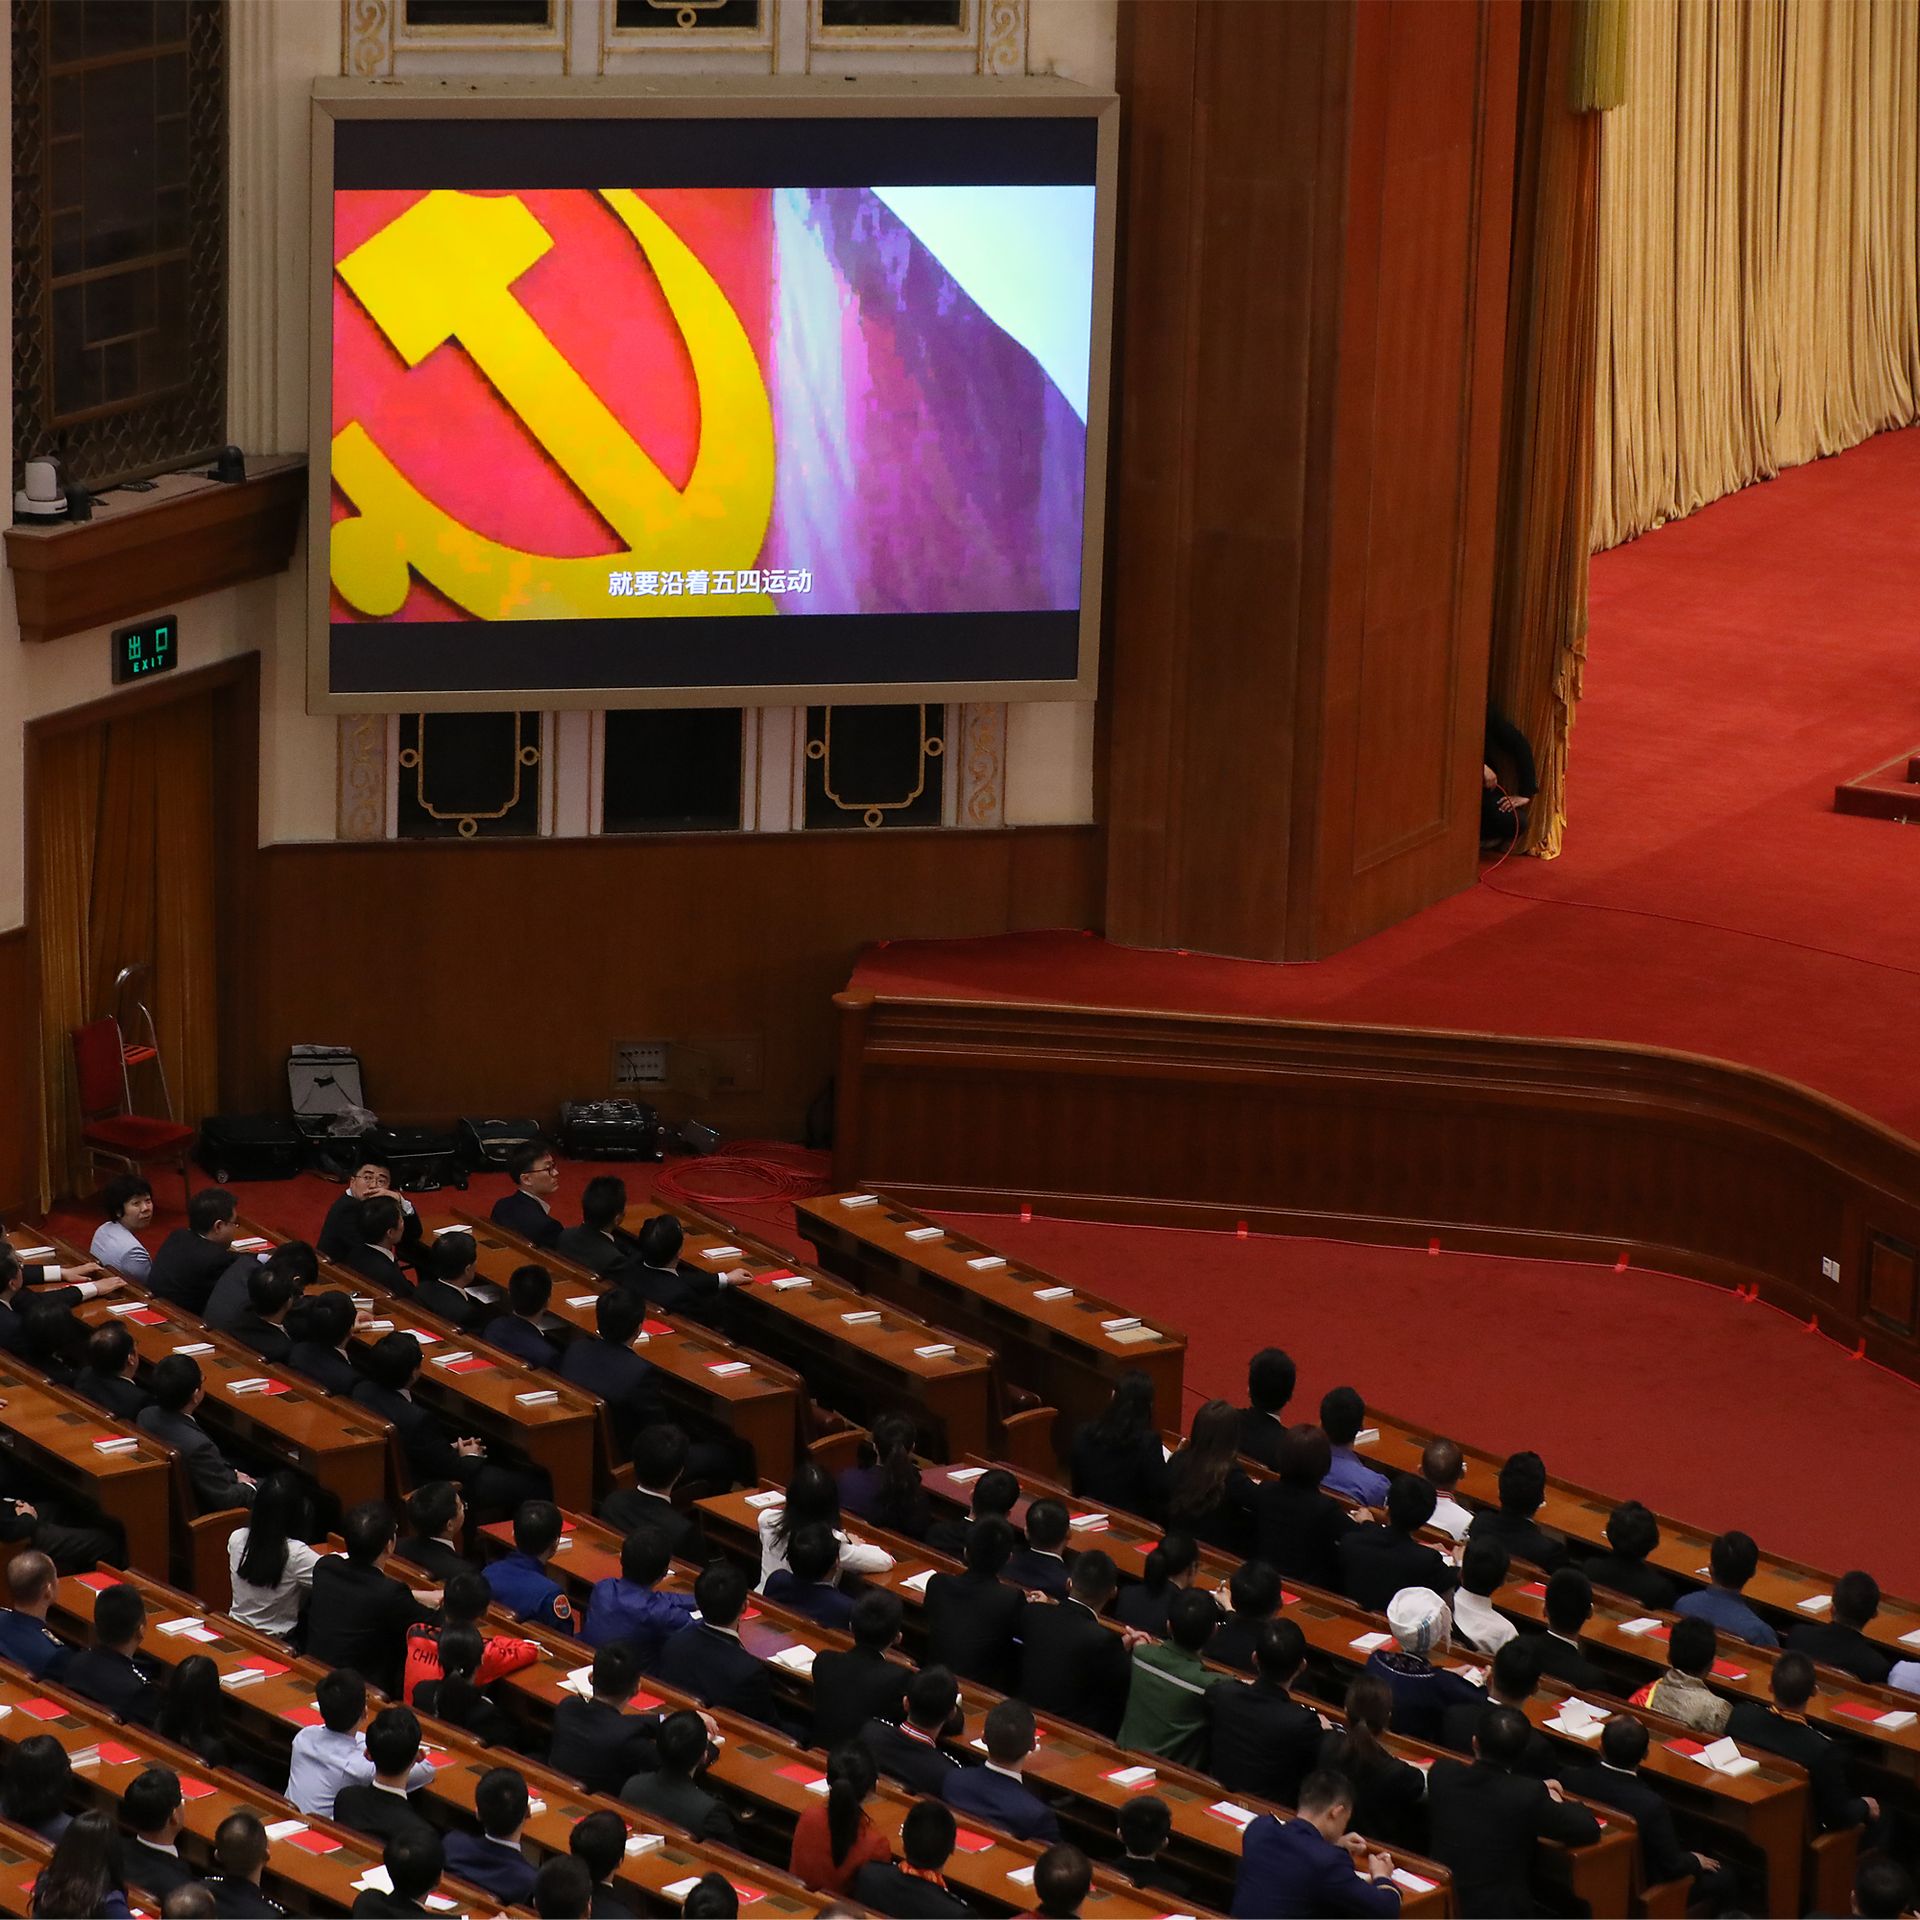  An audience watches a short film about the May 4th Movement at The Great Hall Of The People on April 30 in Beijing.